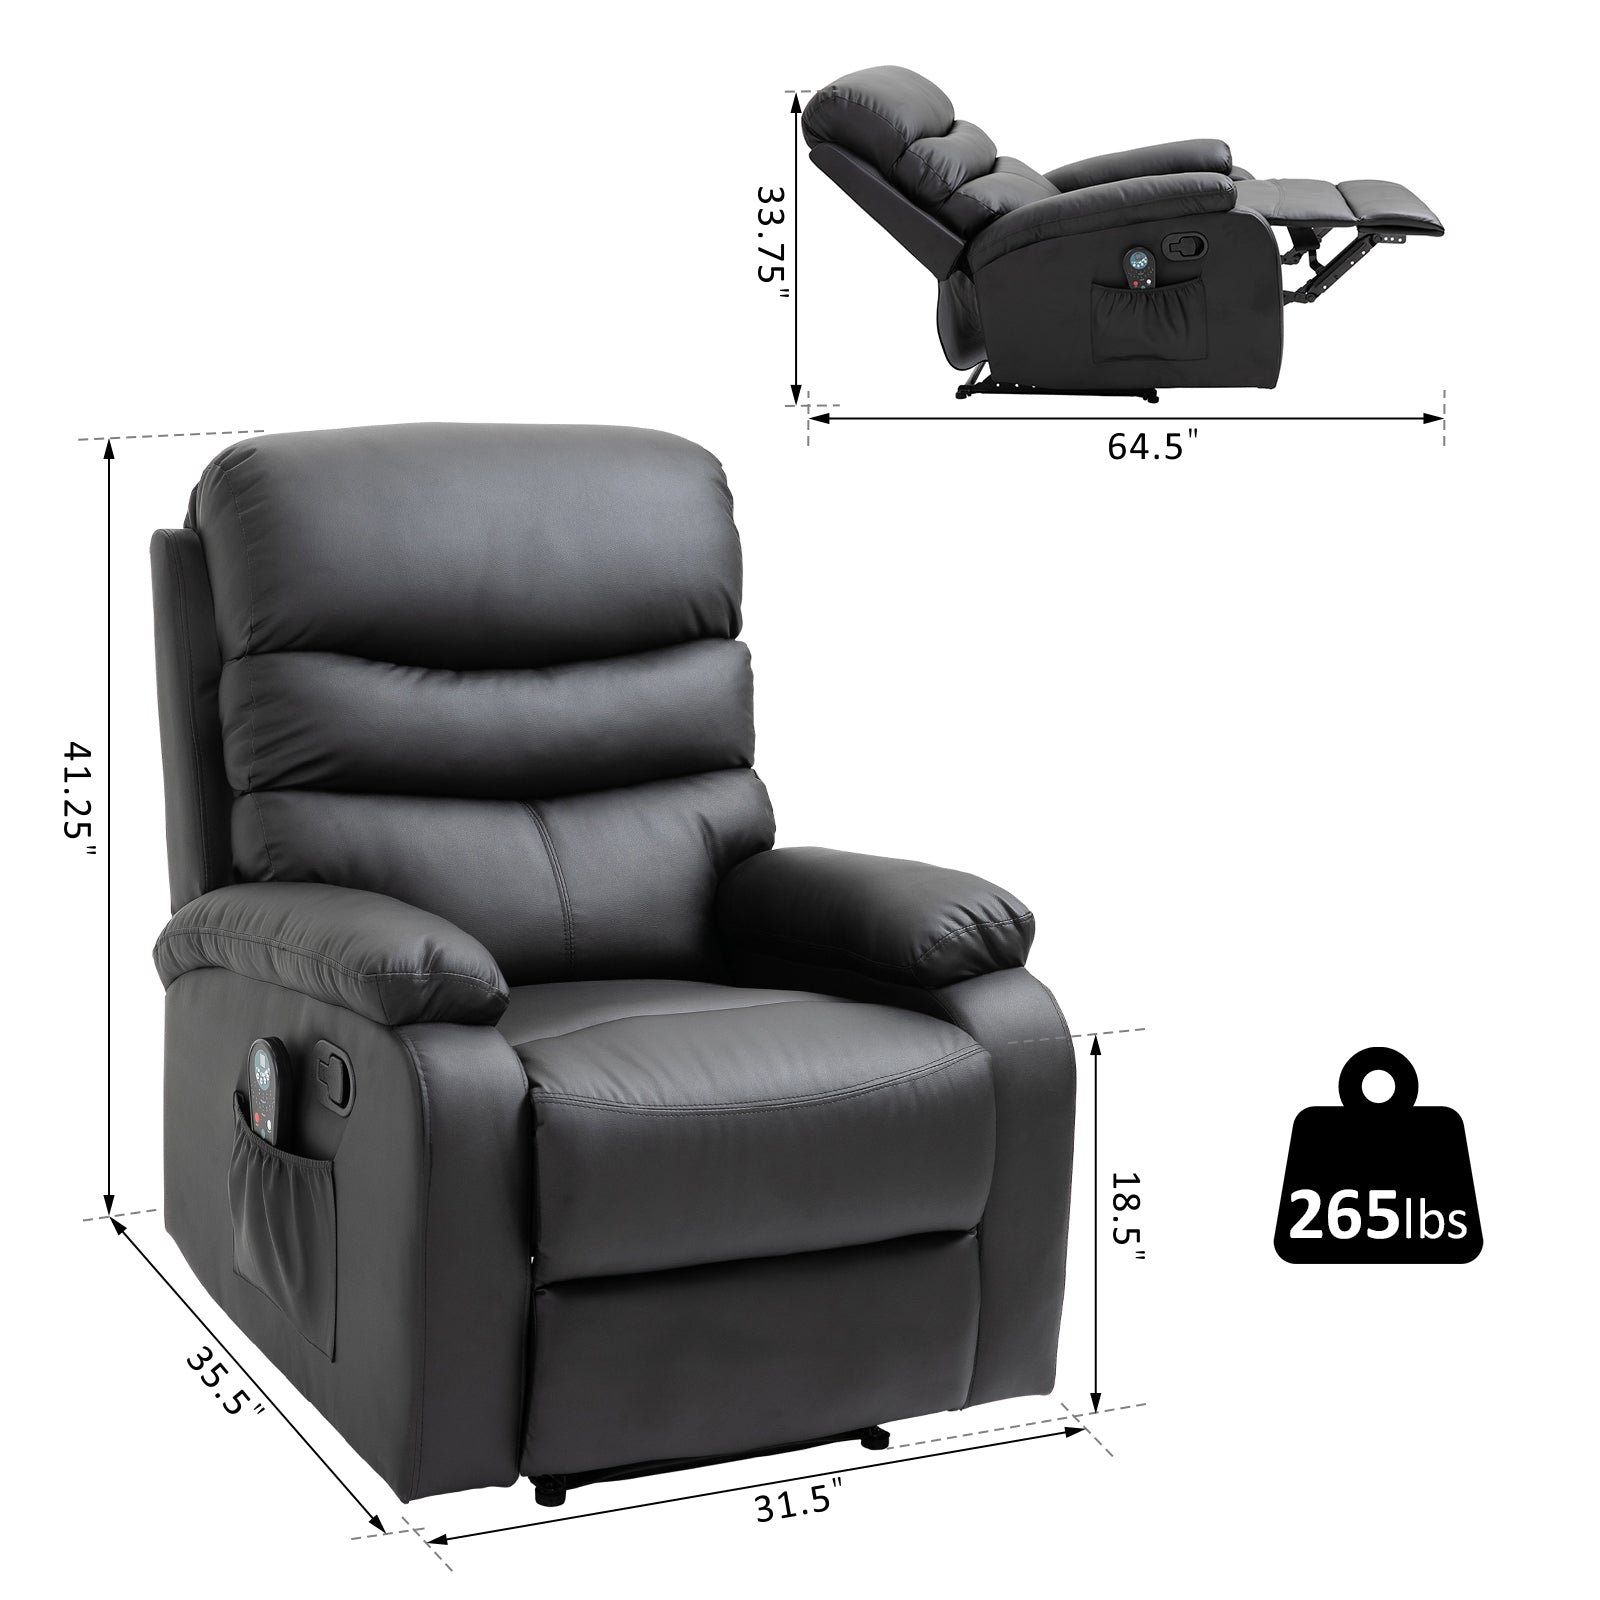 Manual Massage Recliner Chair with Heat and Remote Control 8 Massaging Points PU Leather